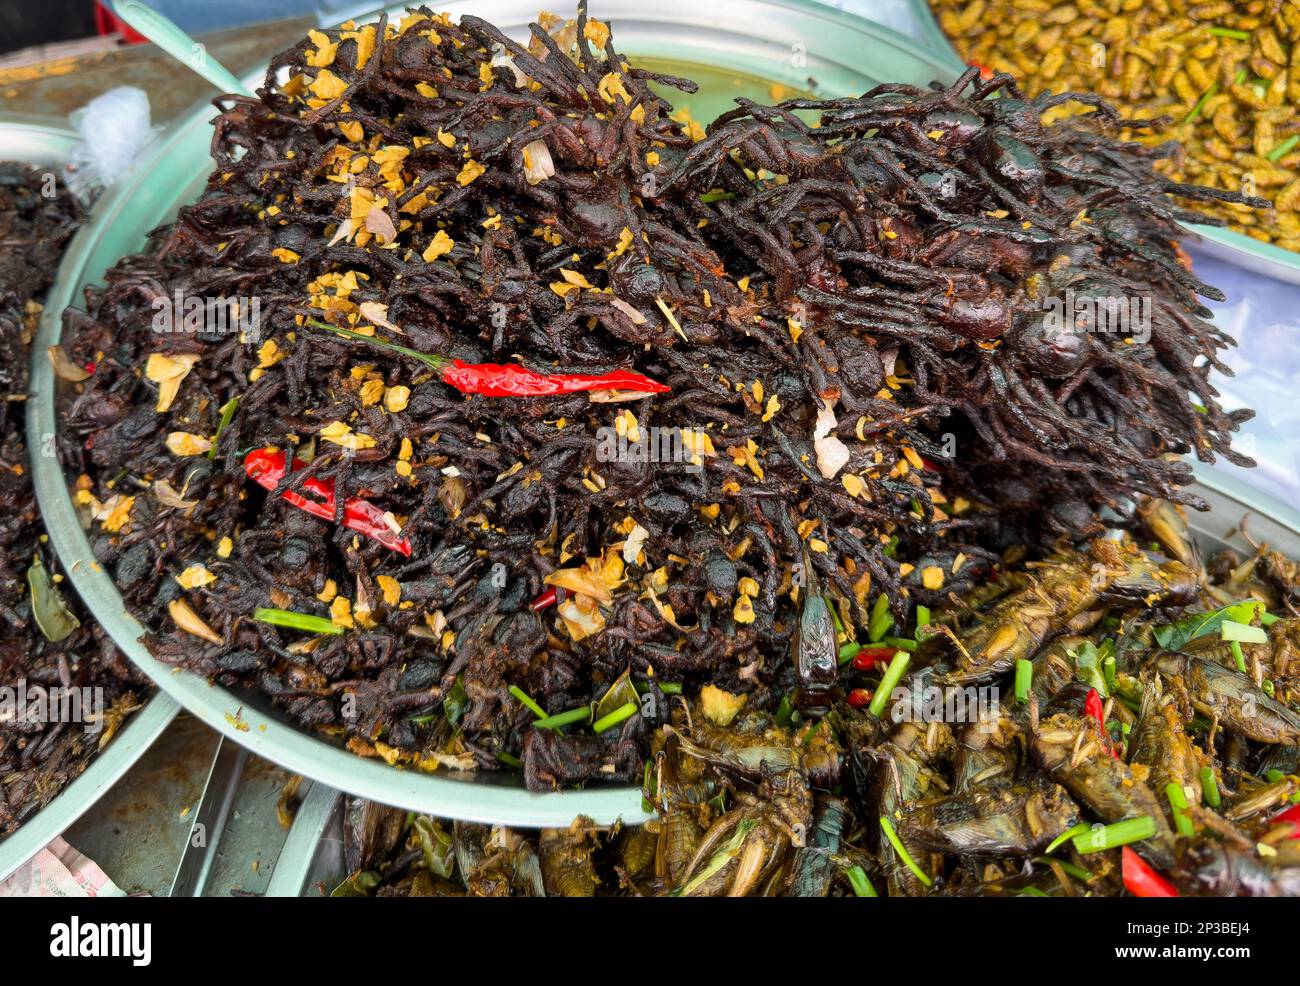 A large bowl of sauteed tarantula spiders on sale at Skun Insect Market in Cambodia. Stock Photo